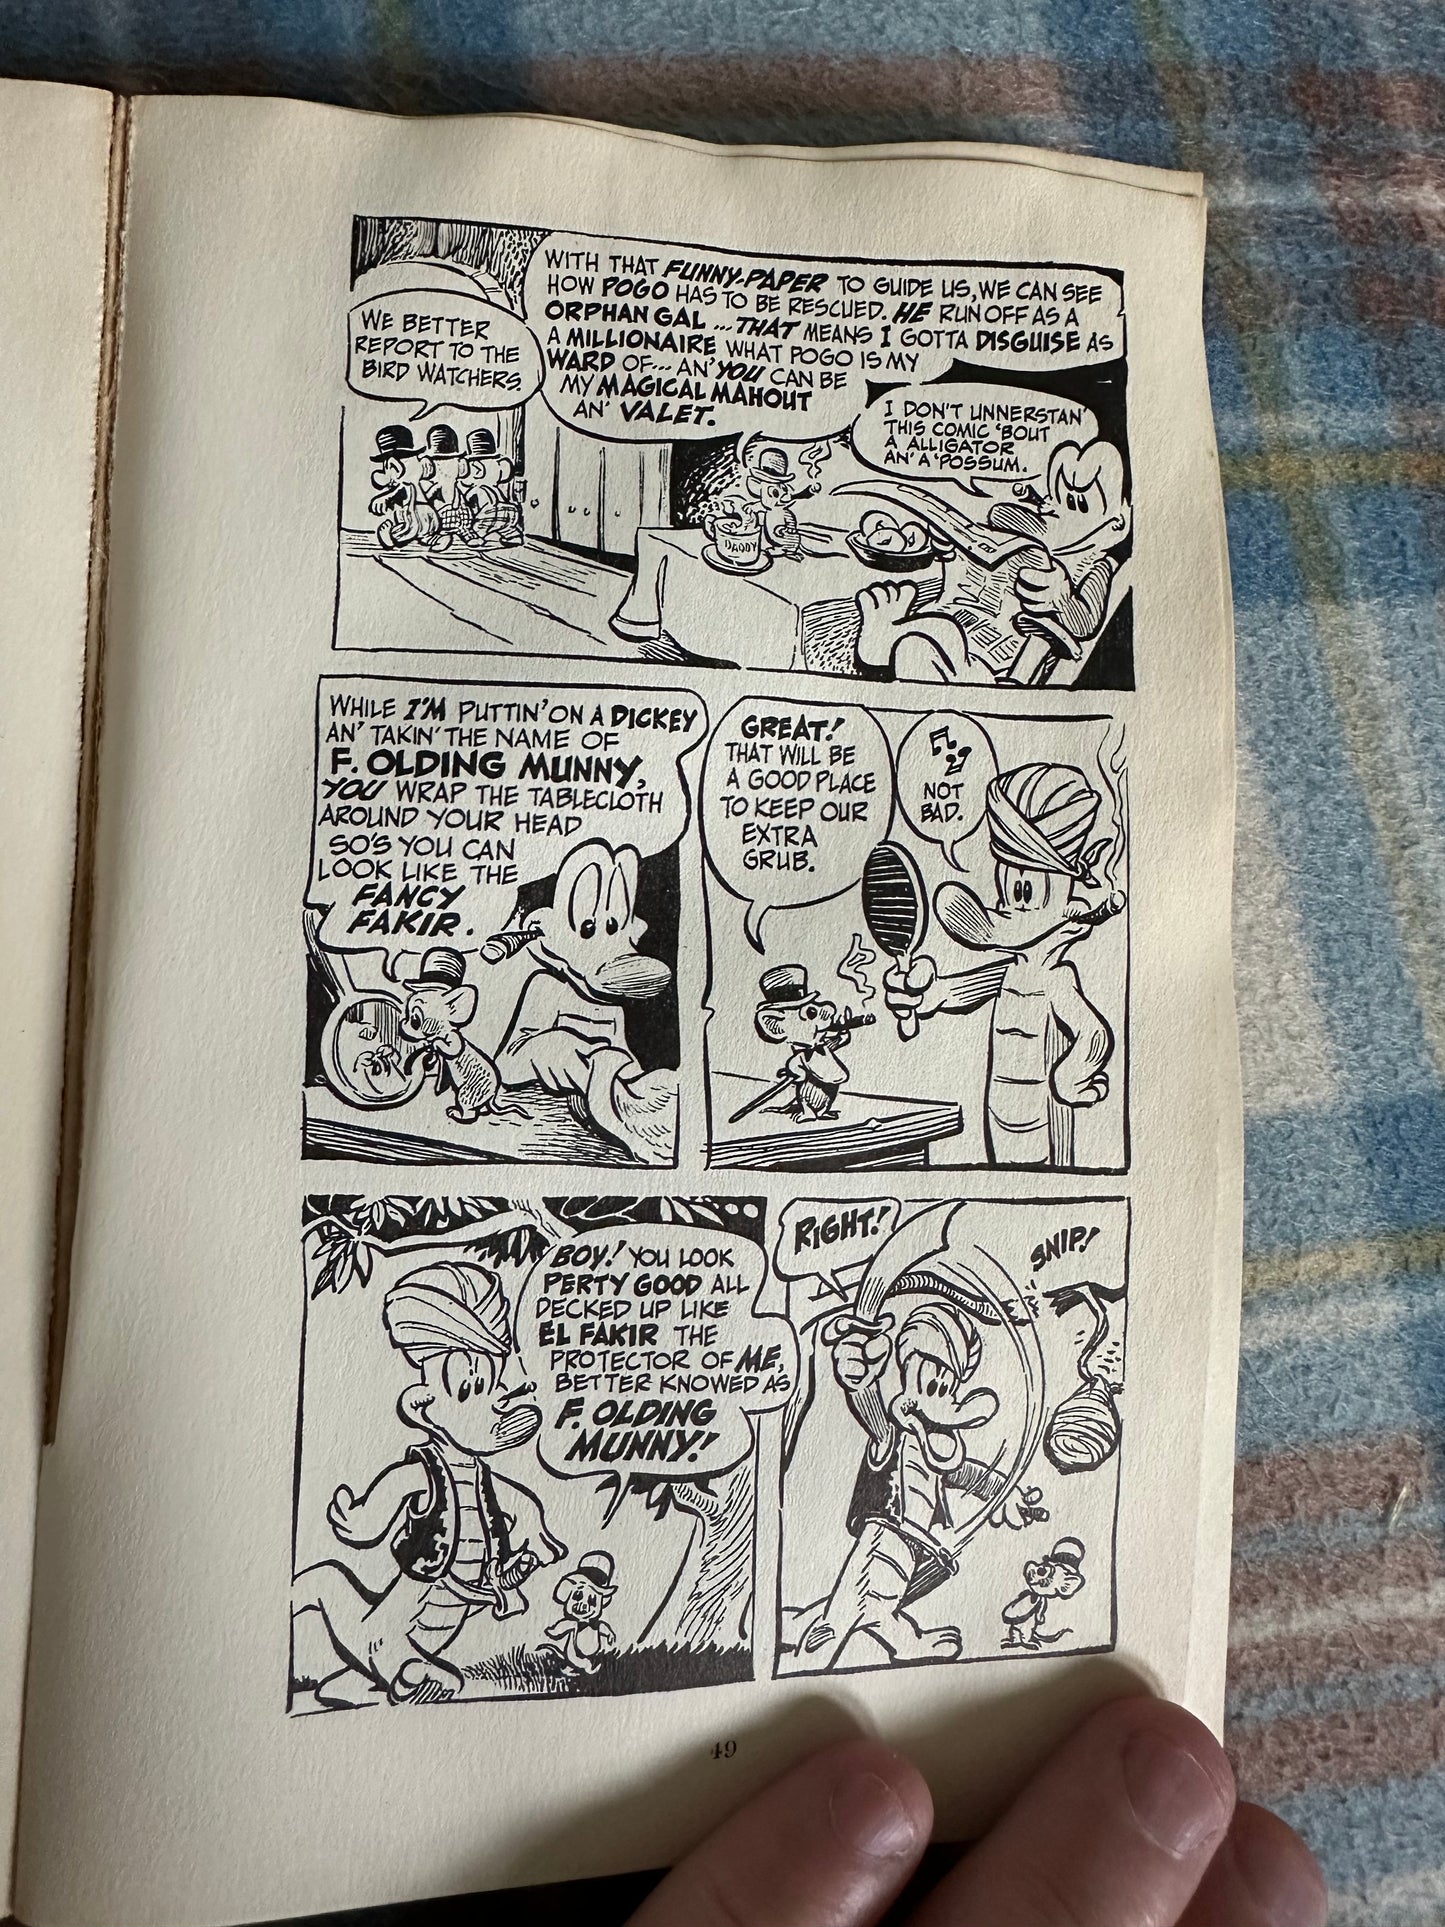 1953*1st* The Pogo Papers - Walt Kelly (Simon & Schuster publishers)